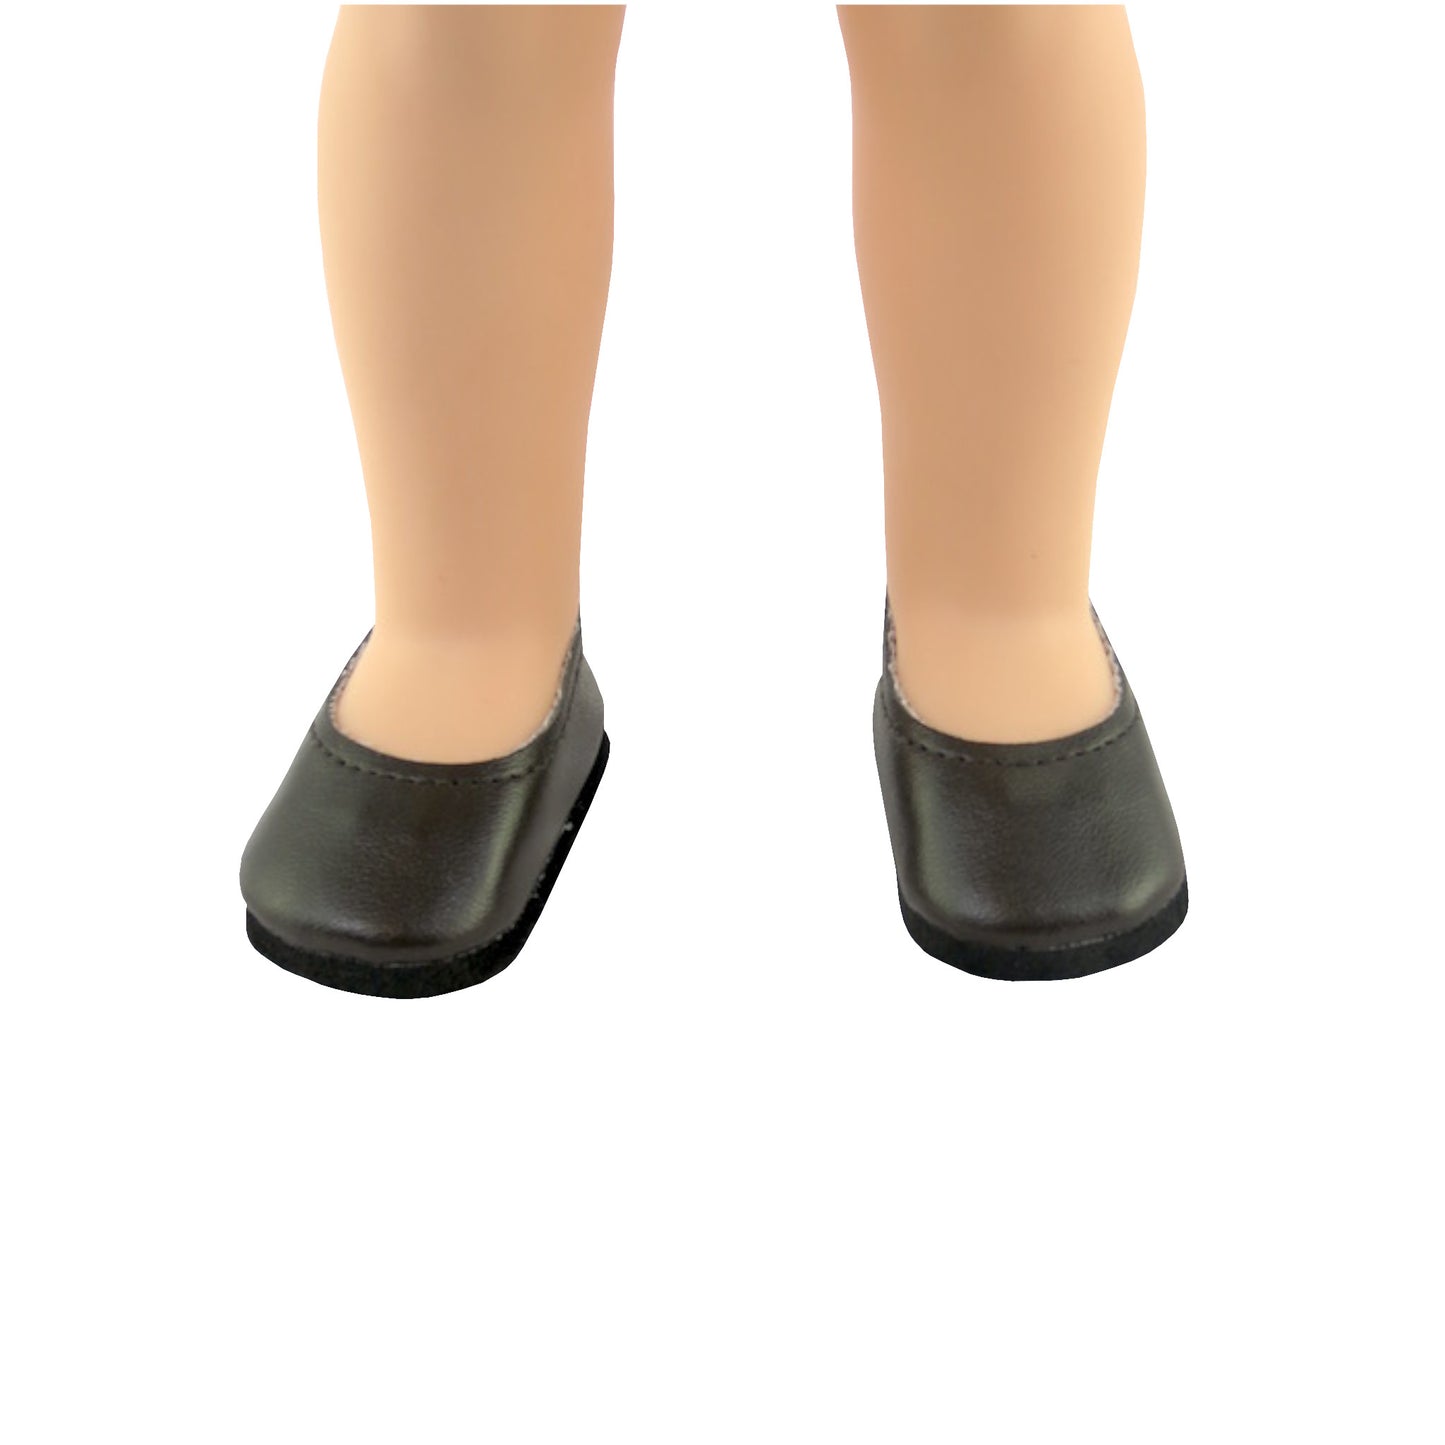 Brown Slip On Shoes for 14 1/2-inch dolls